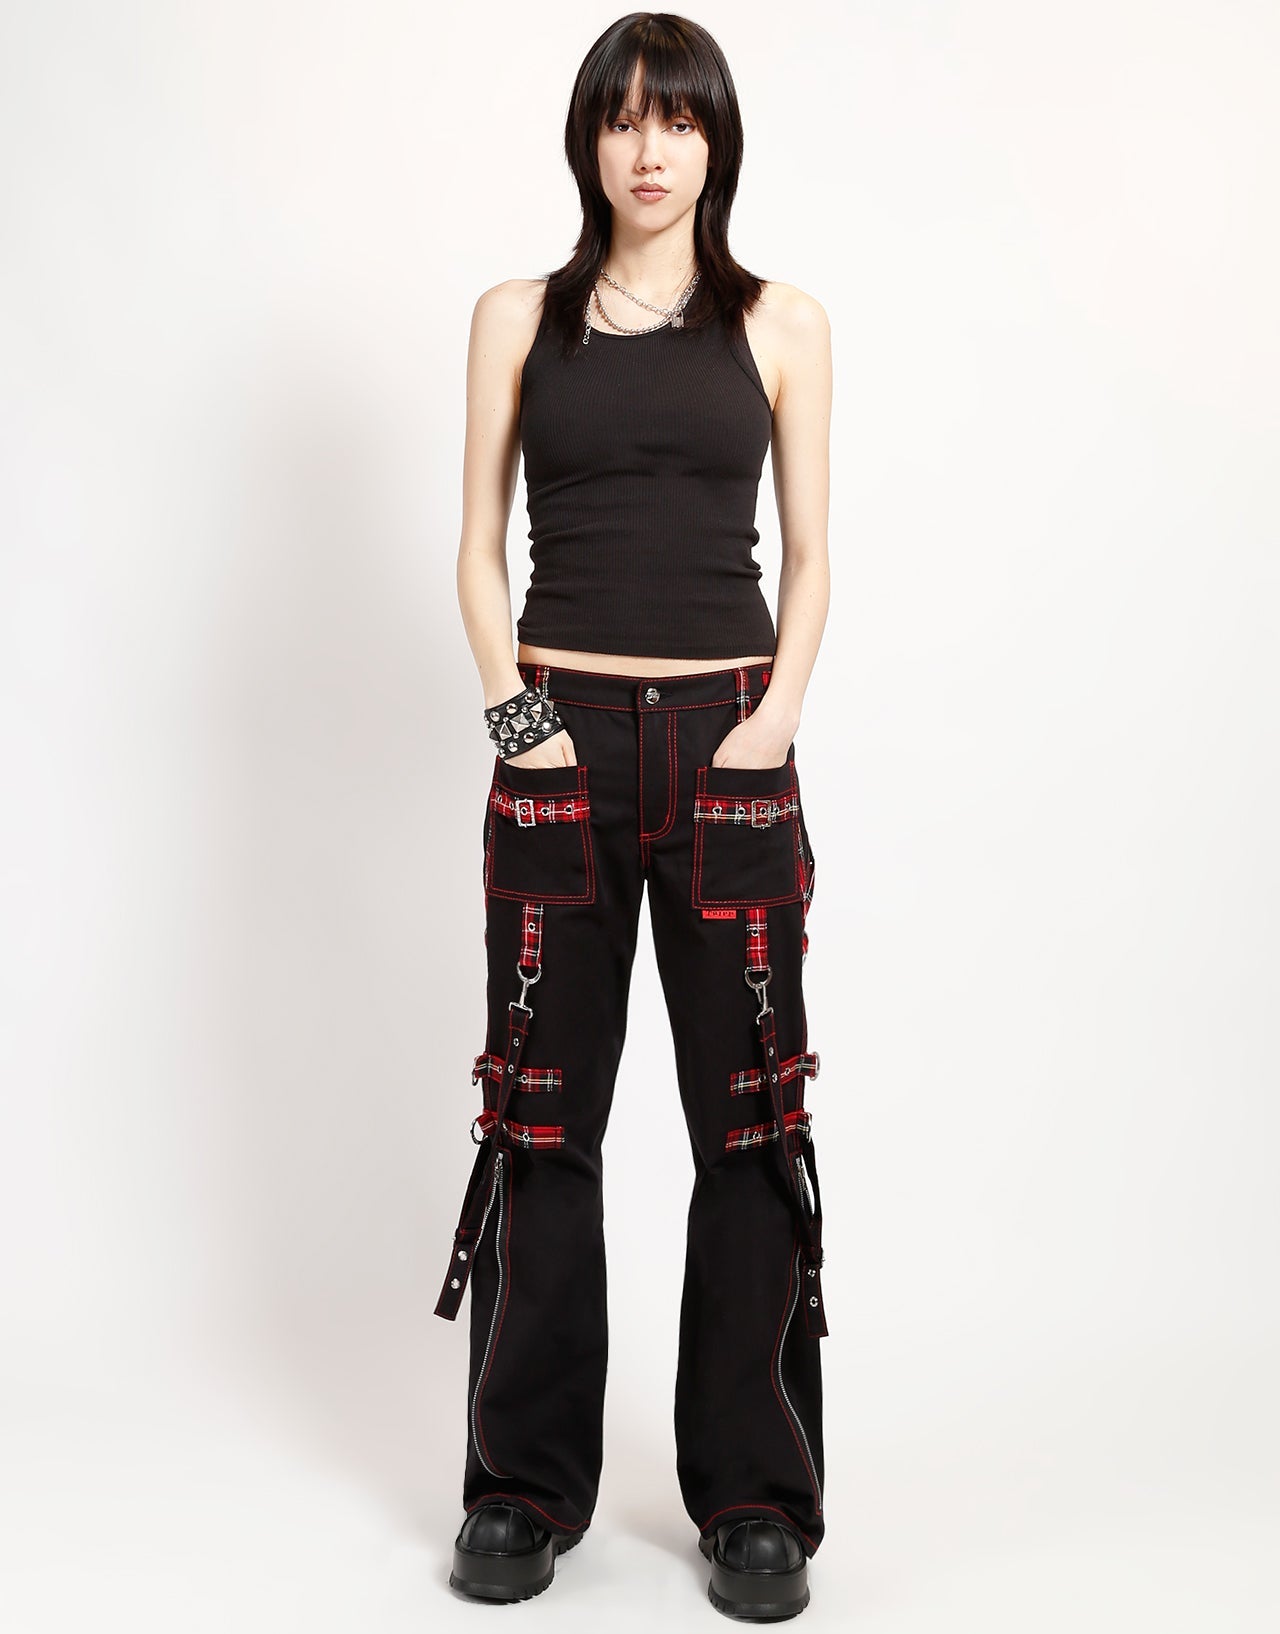 STRAP AND RING PANT